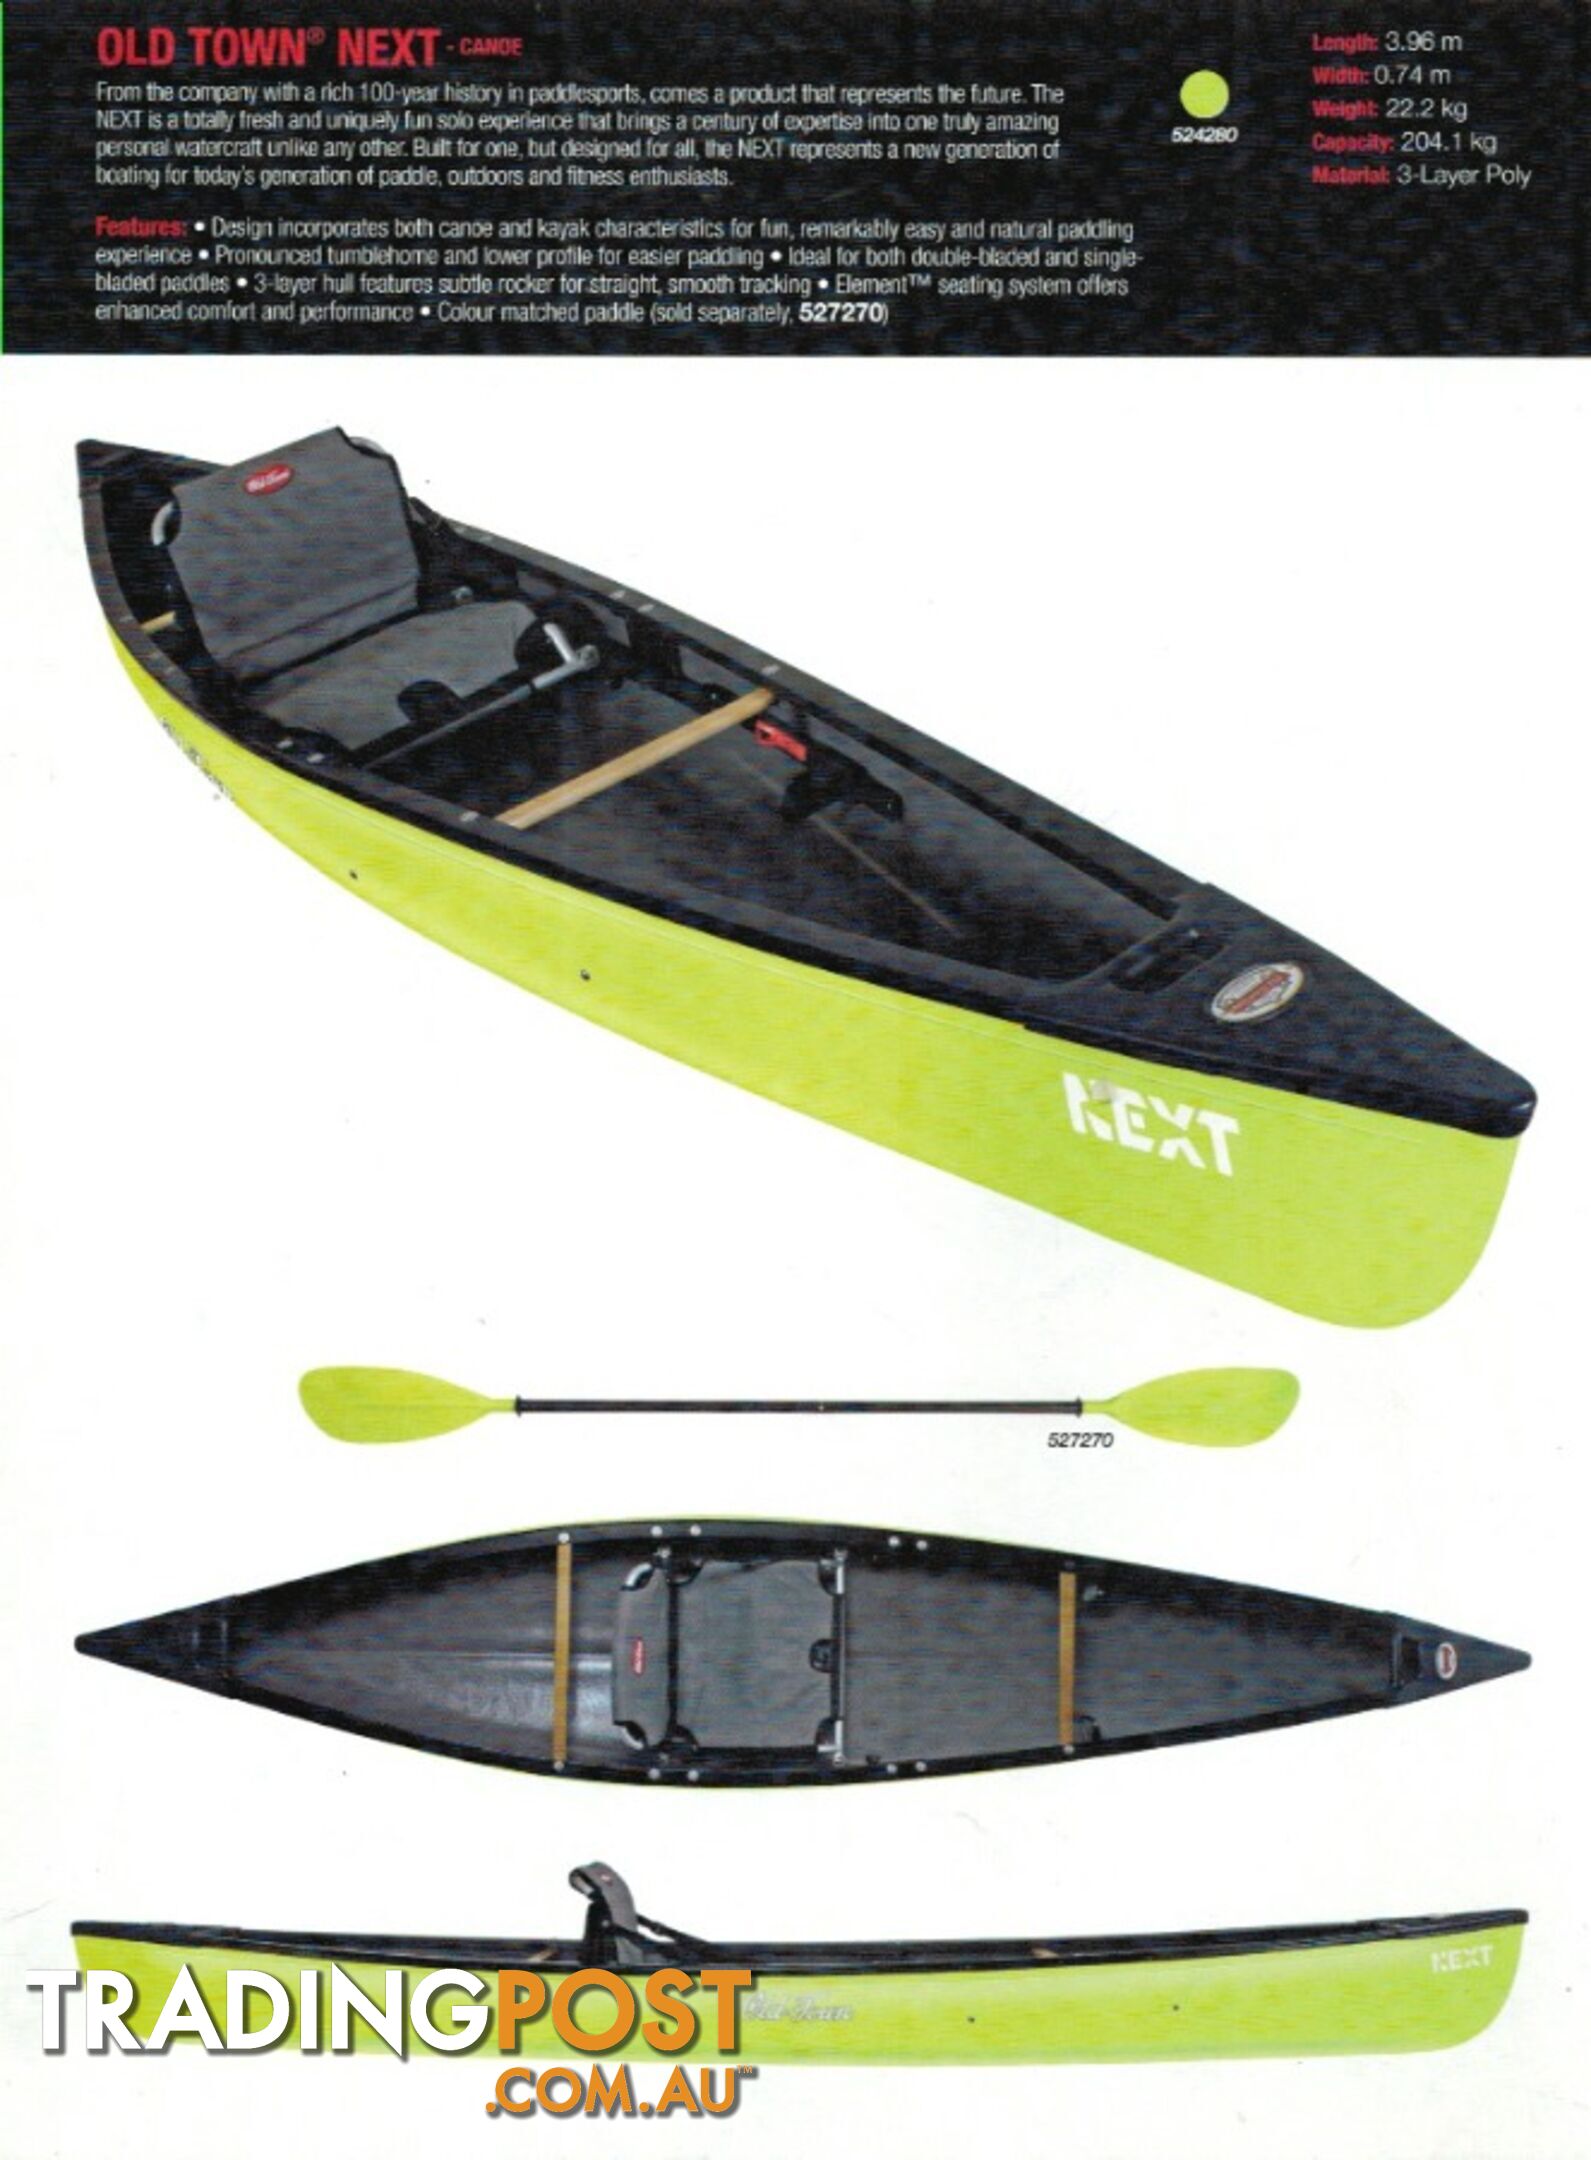 Brand new Canadian Canoes - biggest dealer is OZ by far!